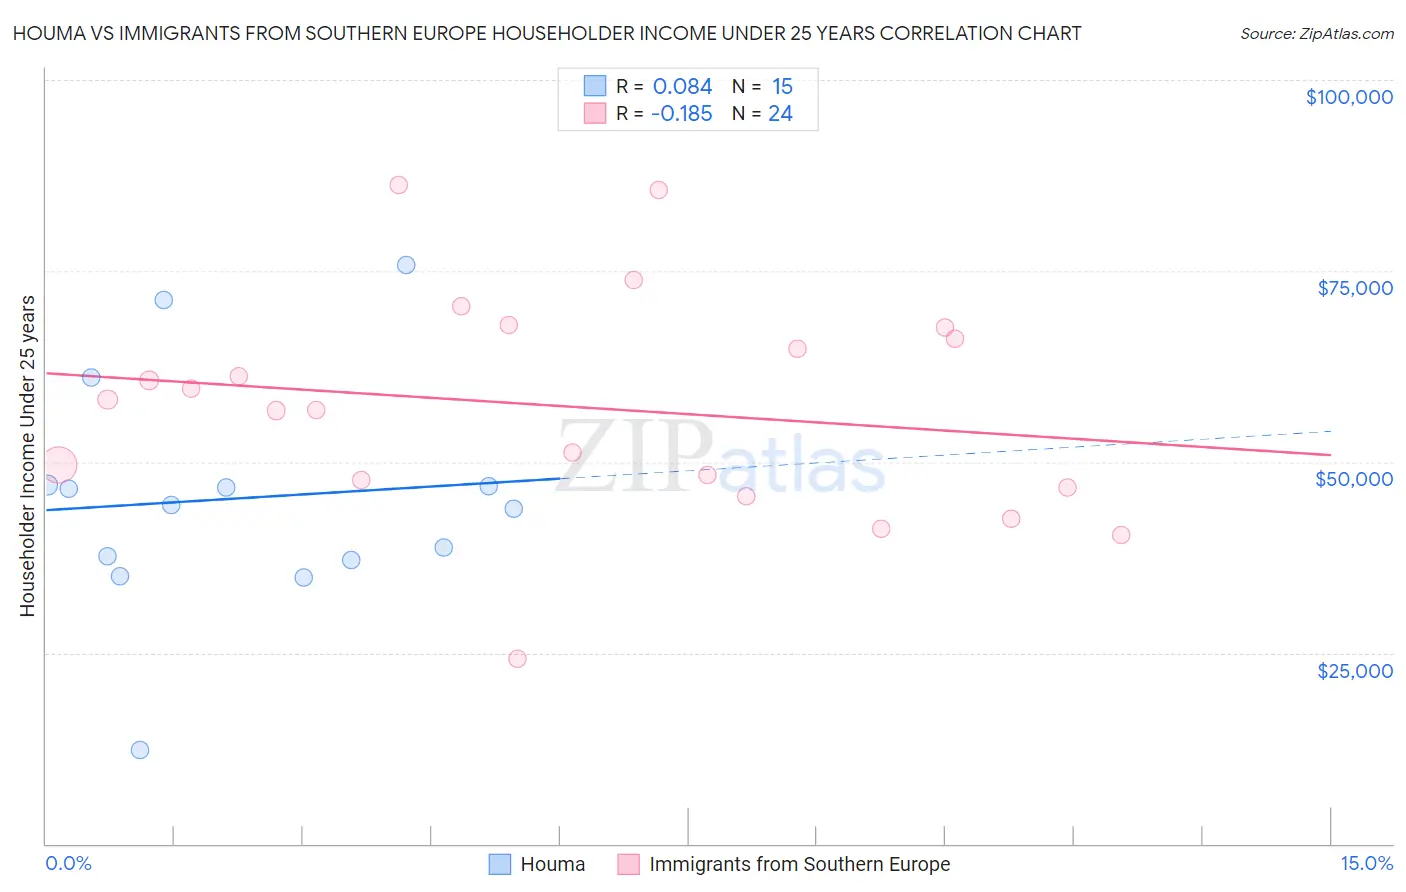 Houma vs Immigrants from Southern Europe Householder Income Under 25 years